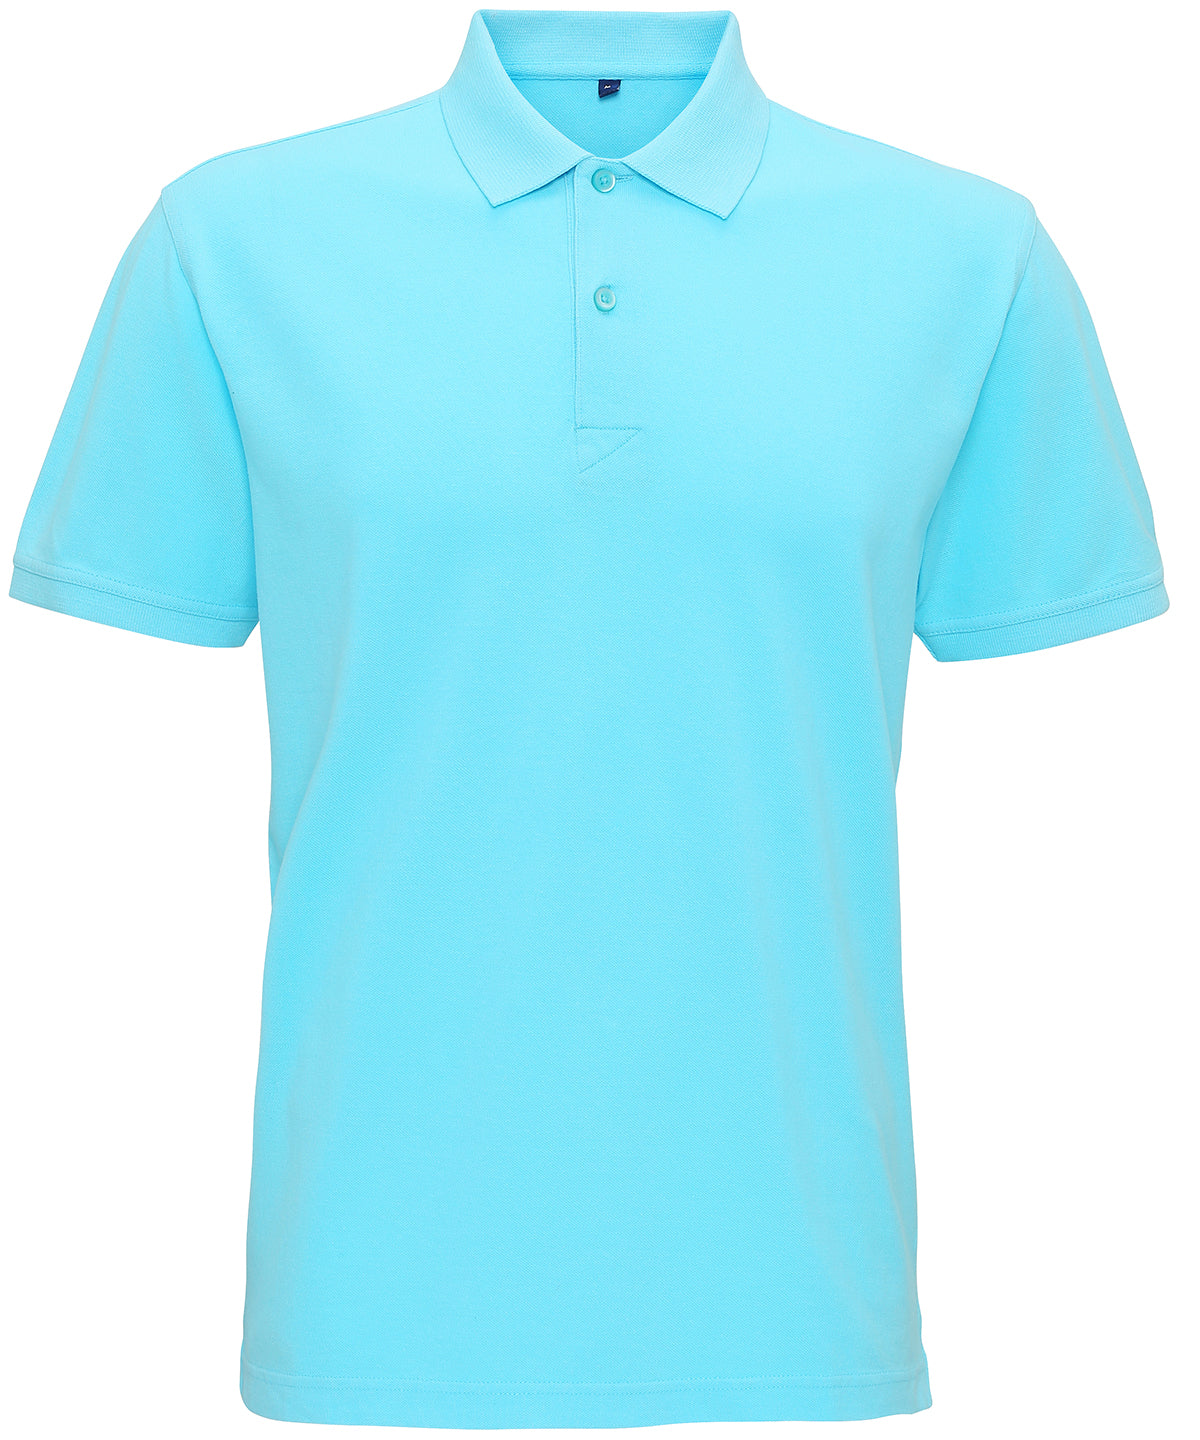 Personalised Polo Shirts - Turquoise Asquith & Fox Men's coastal vintage wash polo